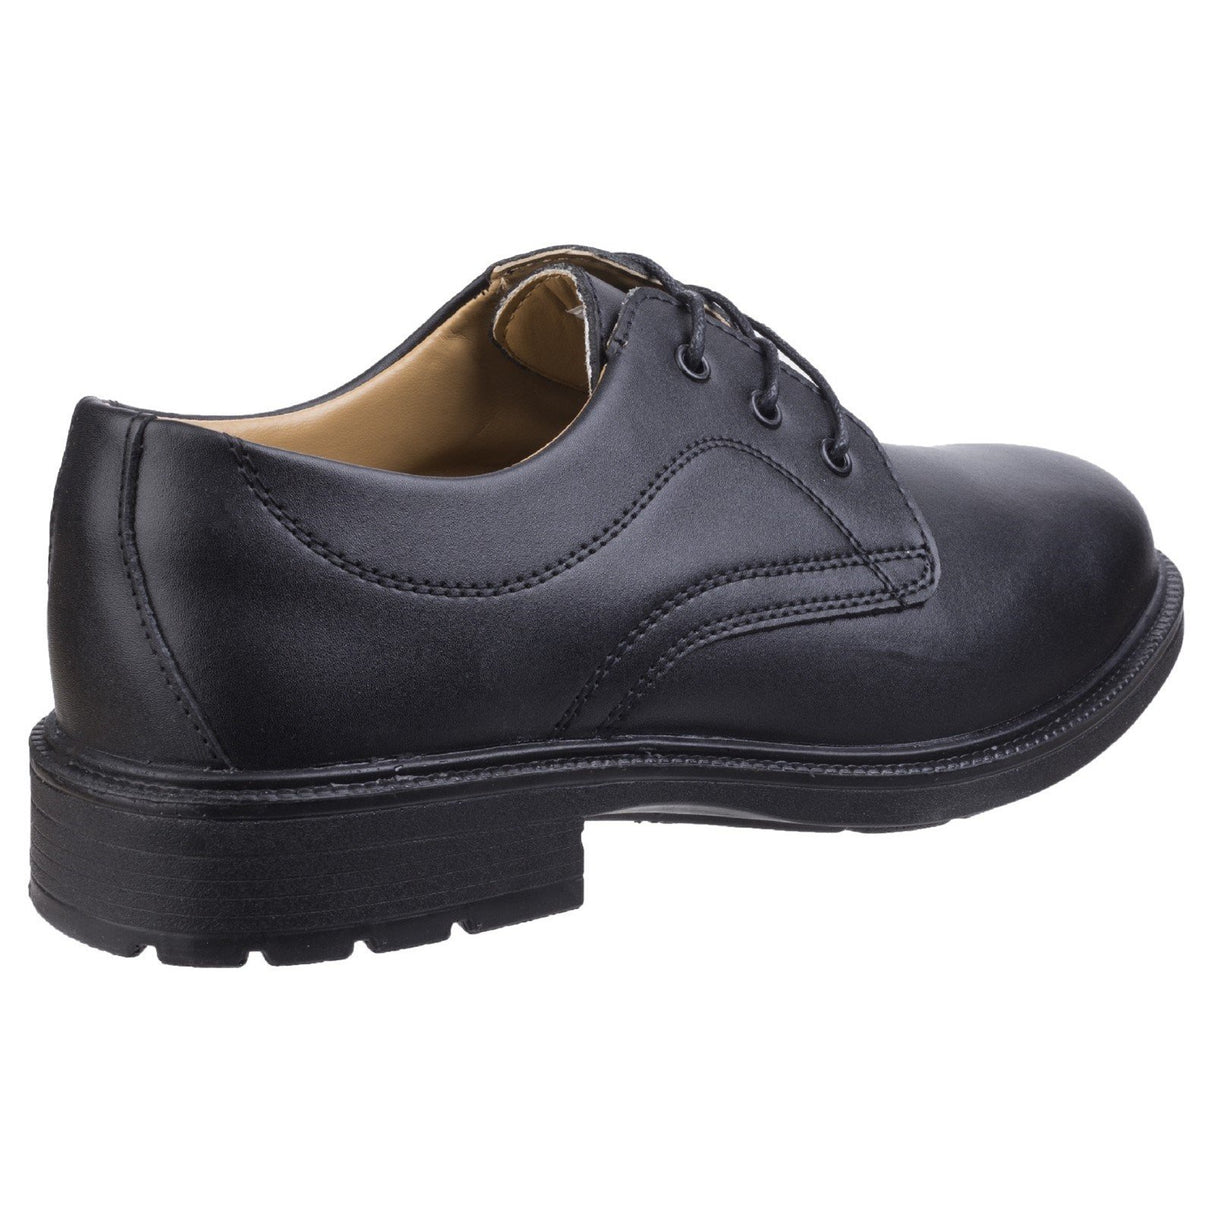 Amblers Safety Formal Safety Shoes